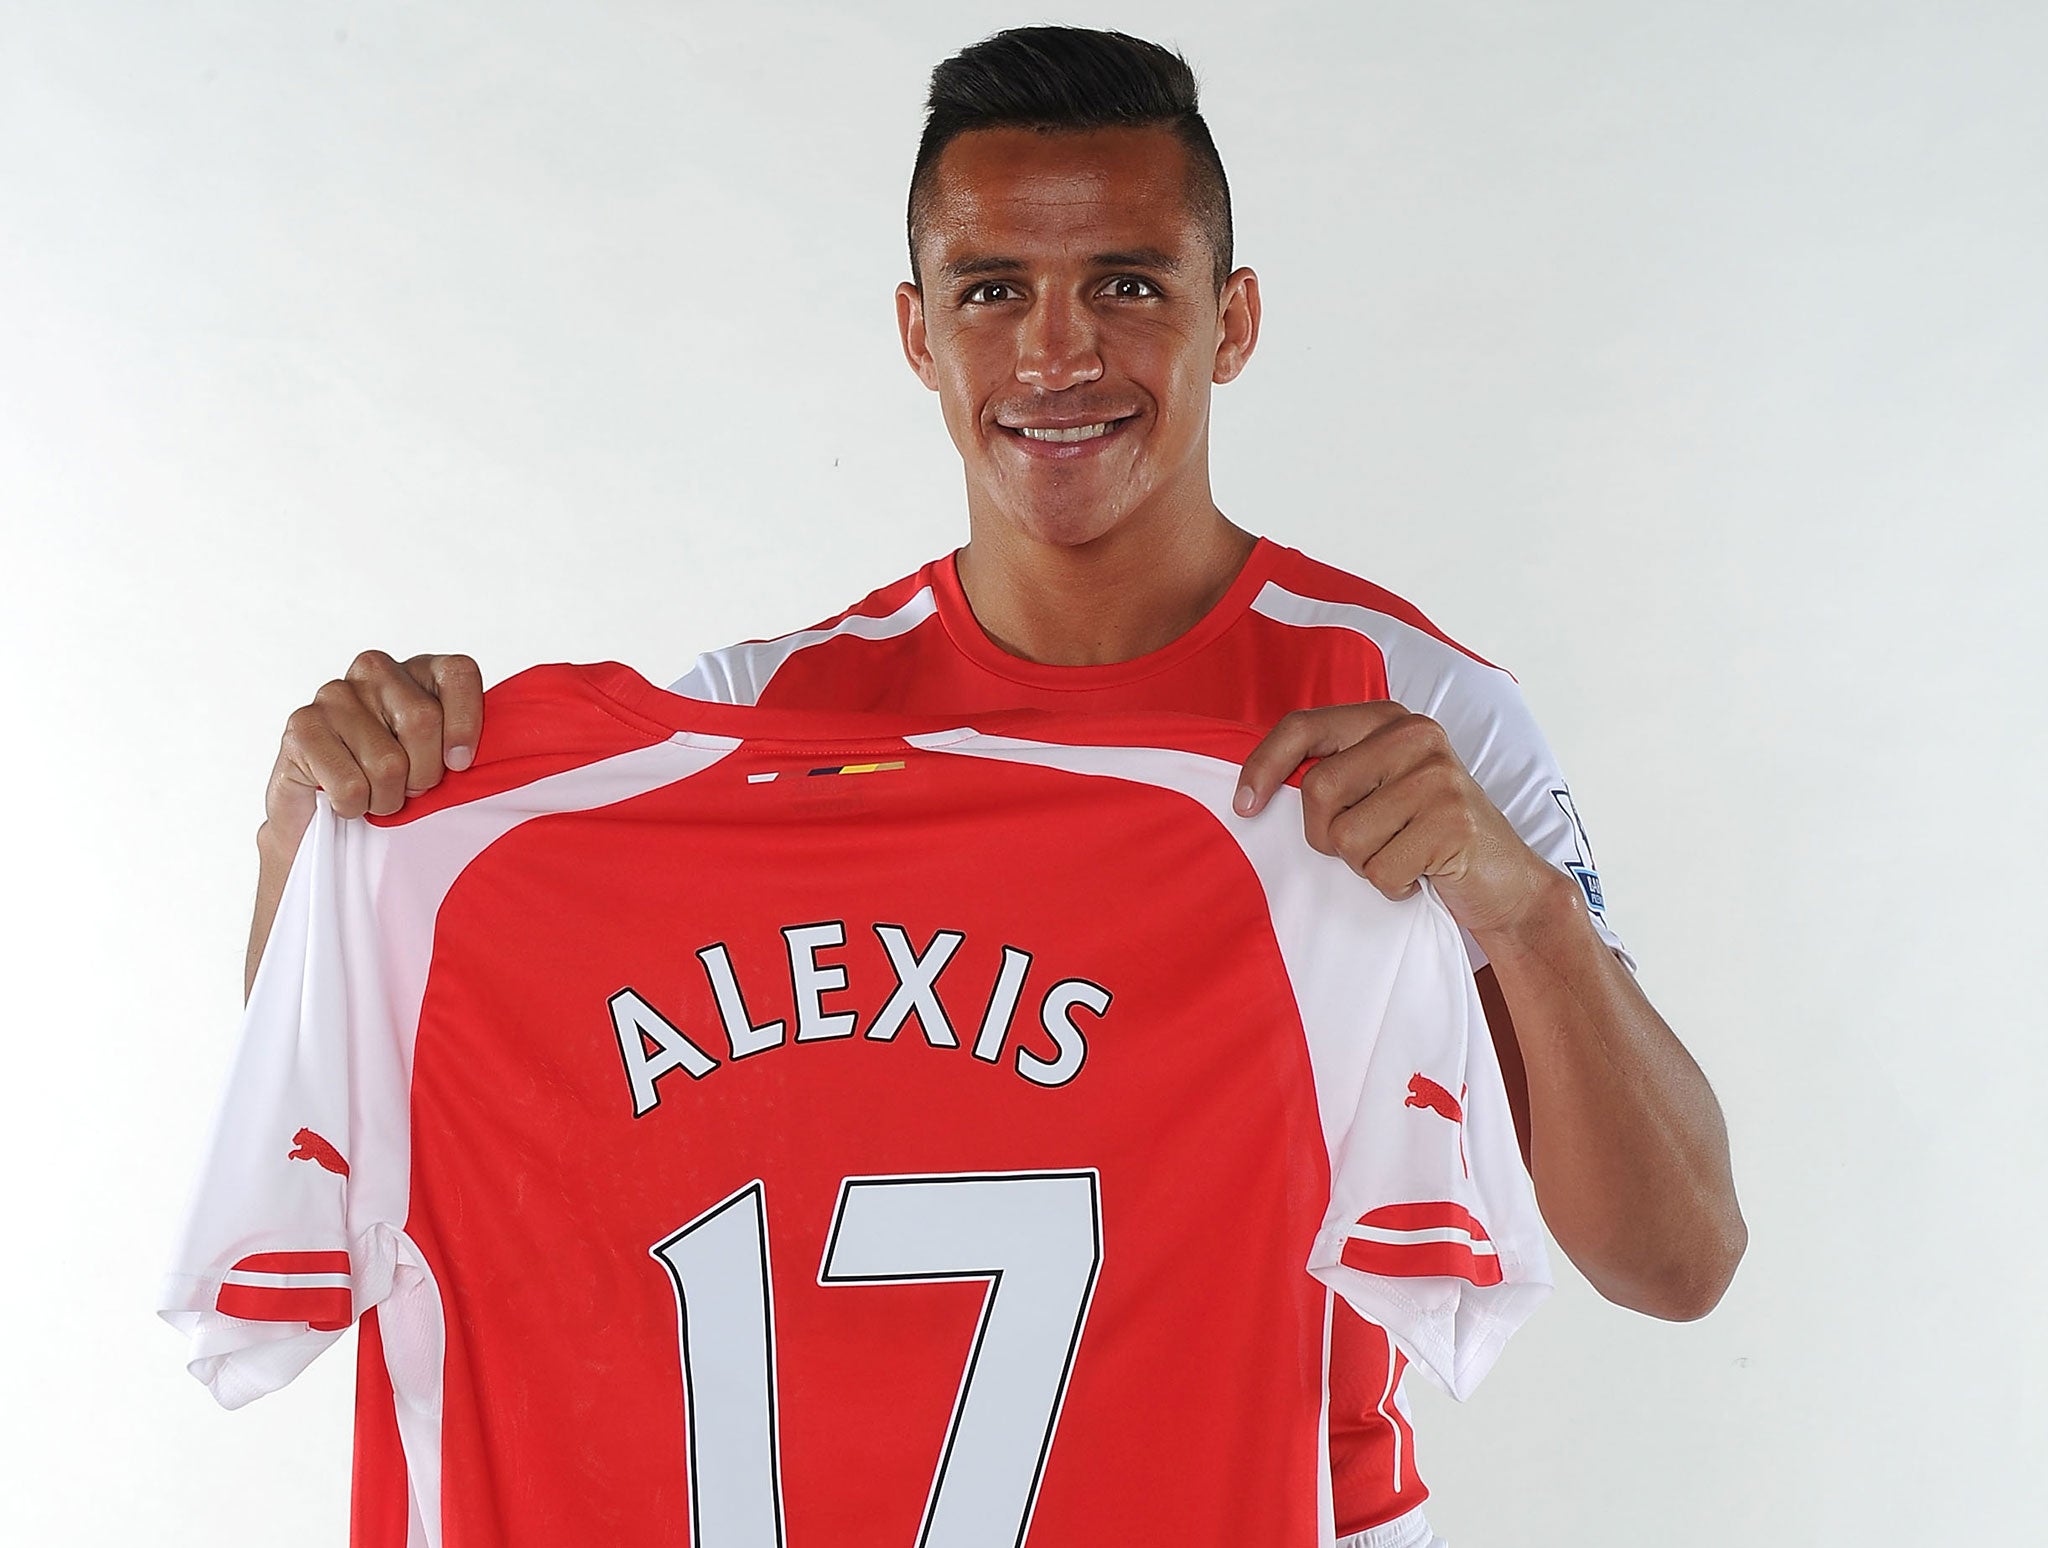 Arsenal fans will soon get the chance to see Alexis Sanchez in action